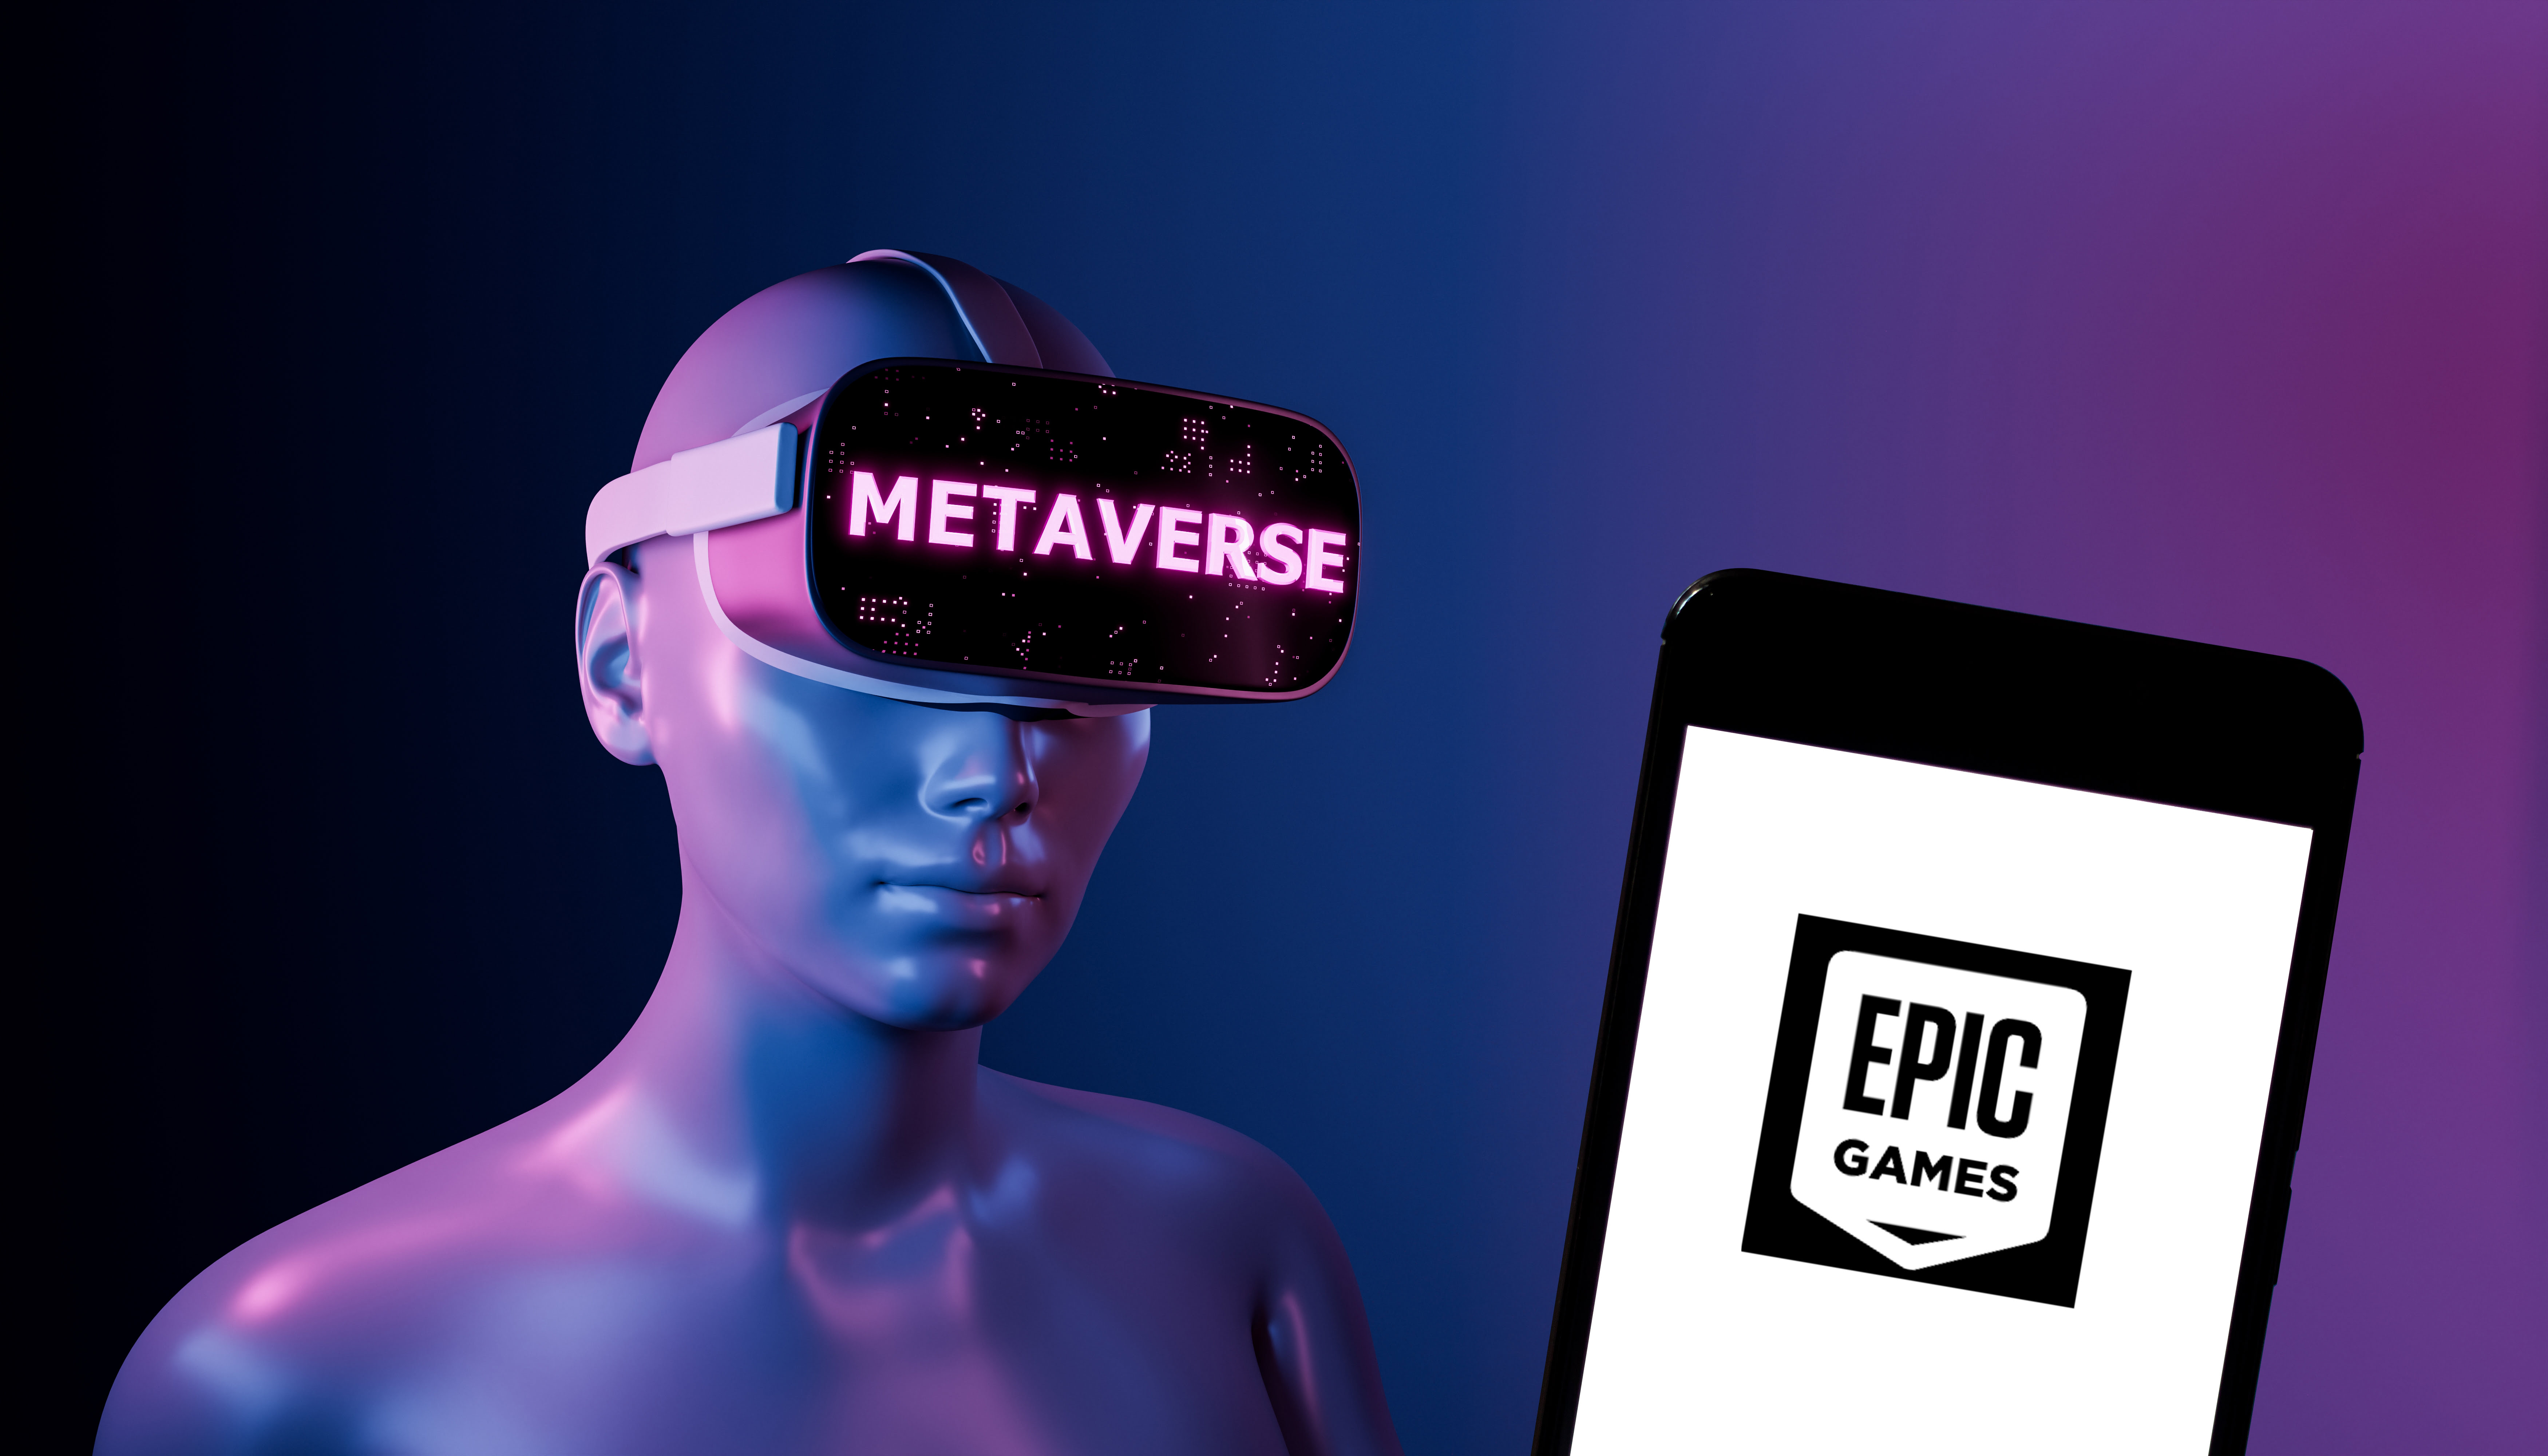 Metaverse Step with Epic Games from WPP